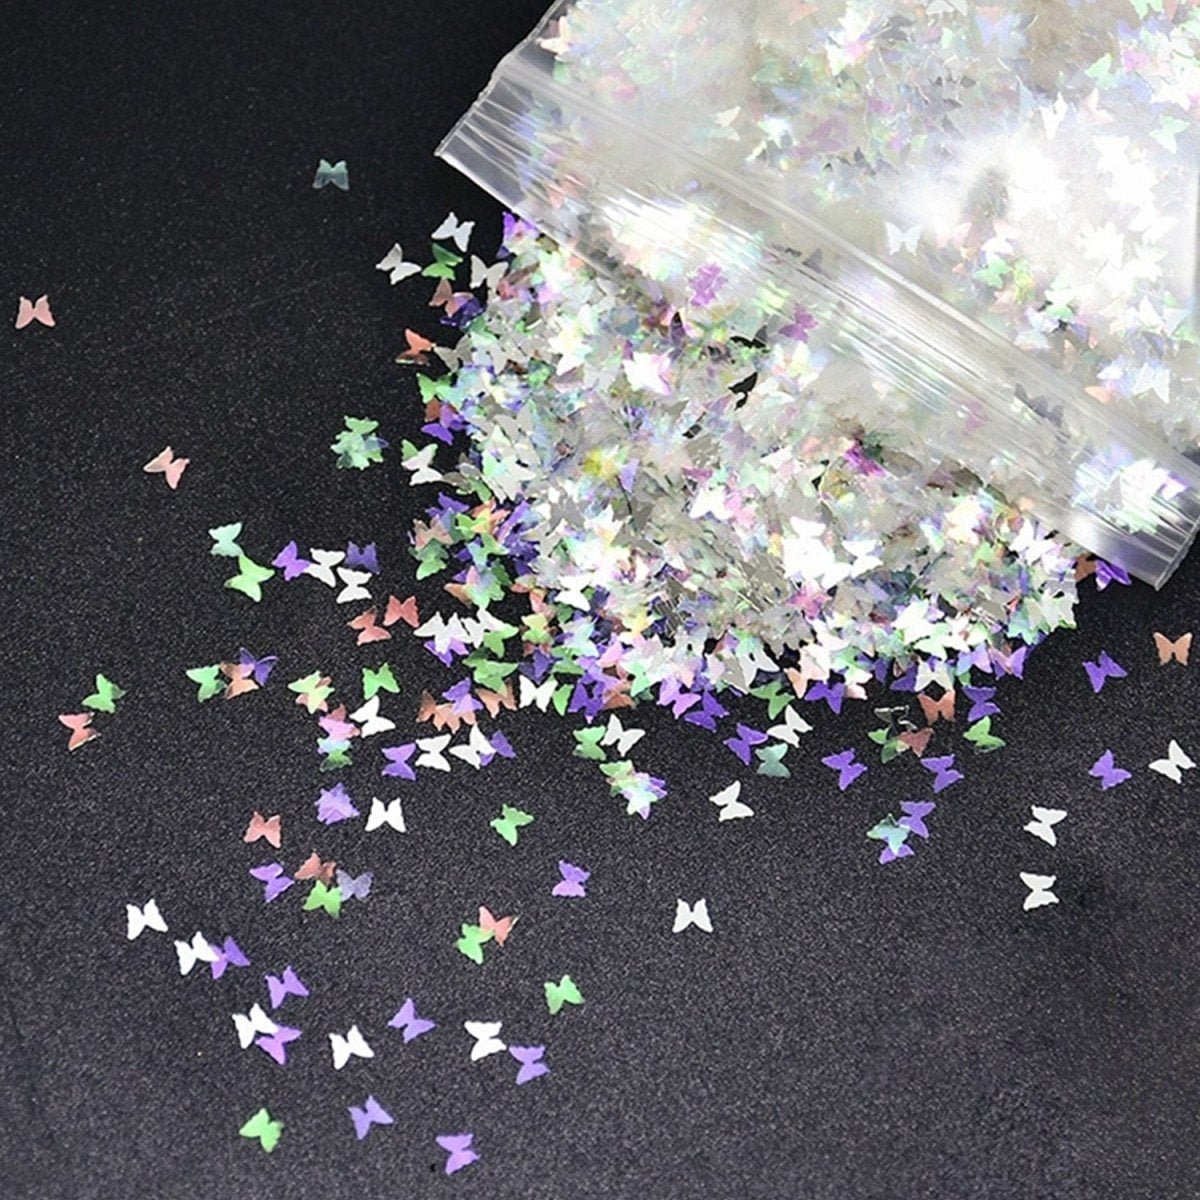 10g Holographic Nail Art Decals Silver Gold Stars Butterflies Bling Decorations - White/Silver Butterfly Sequins - - Asia Sell